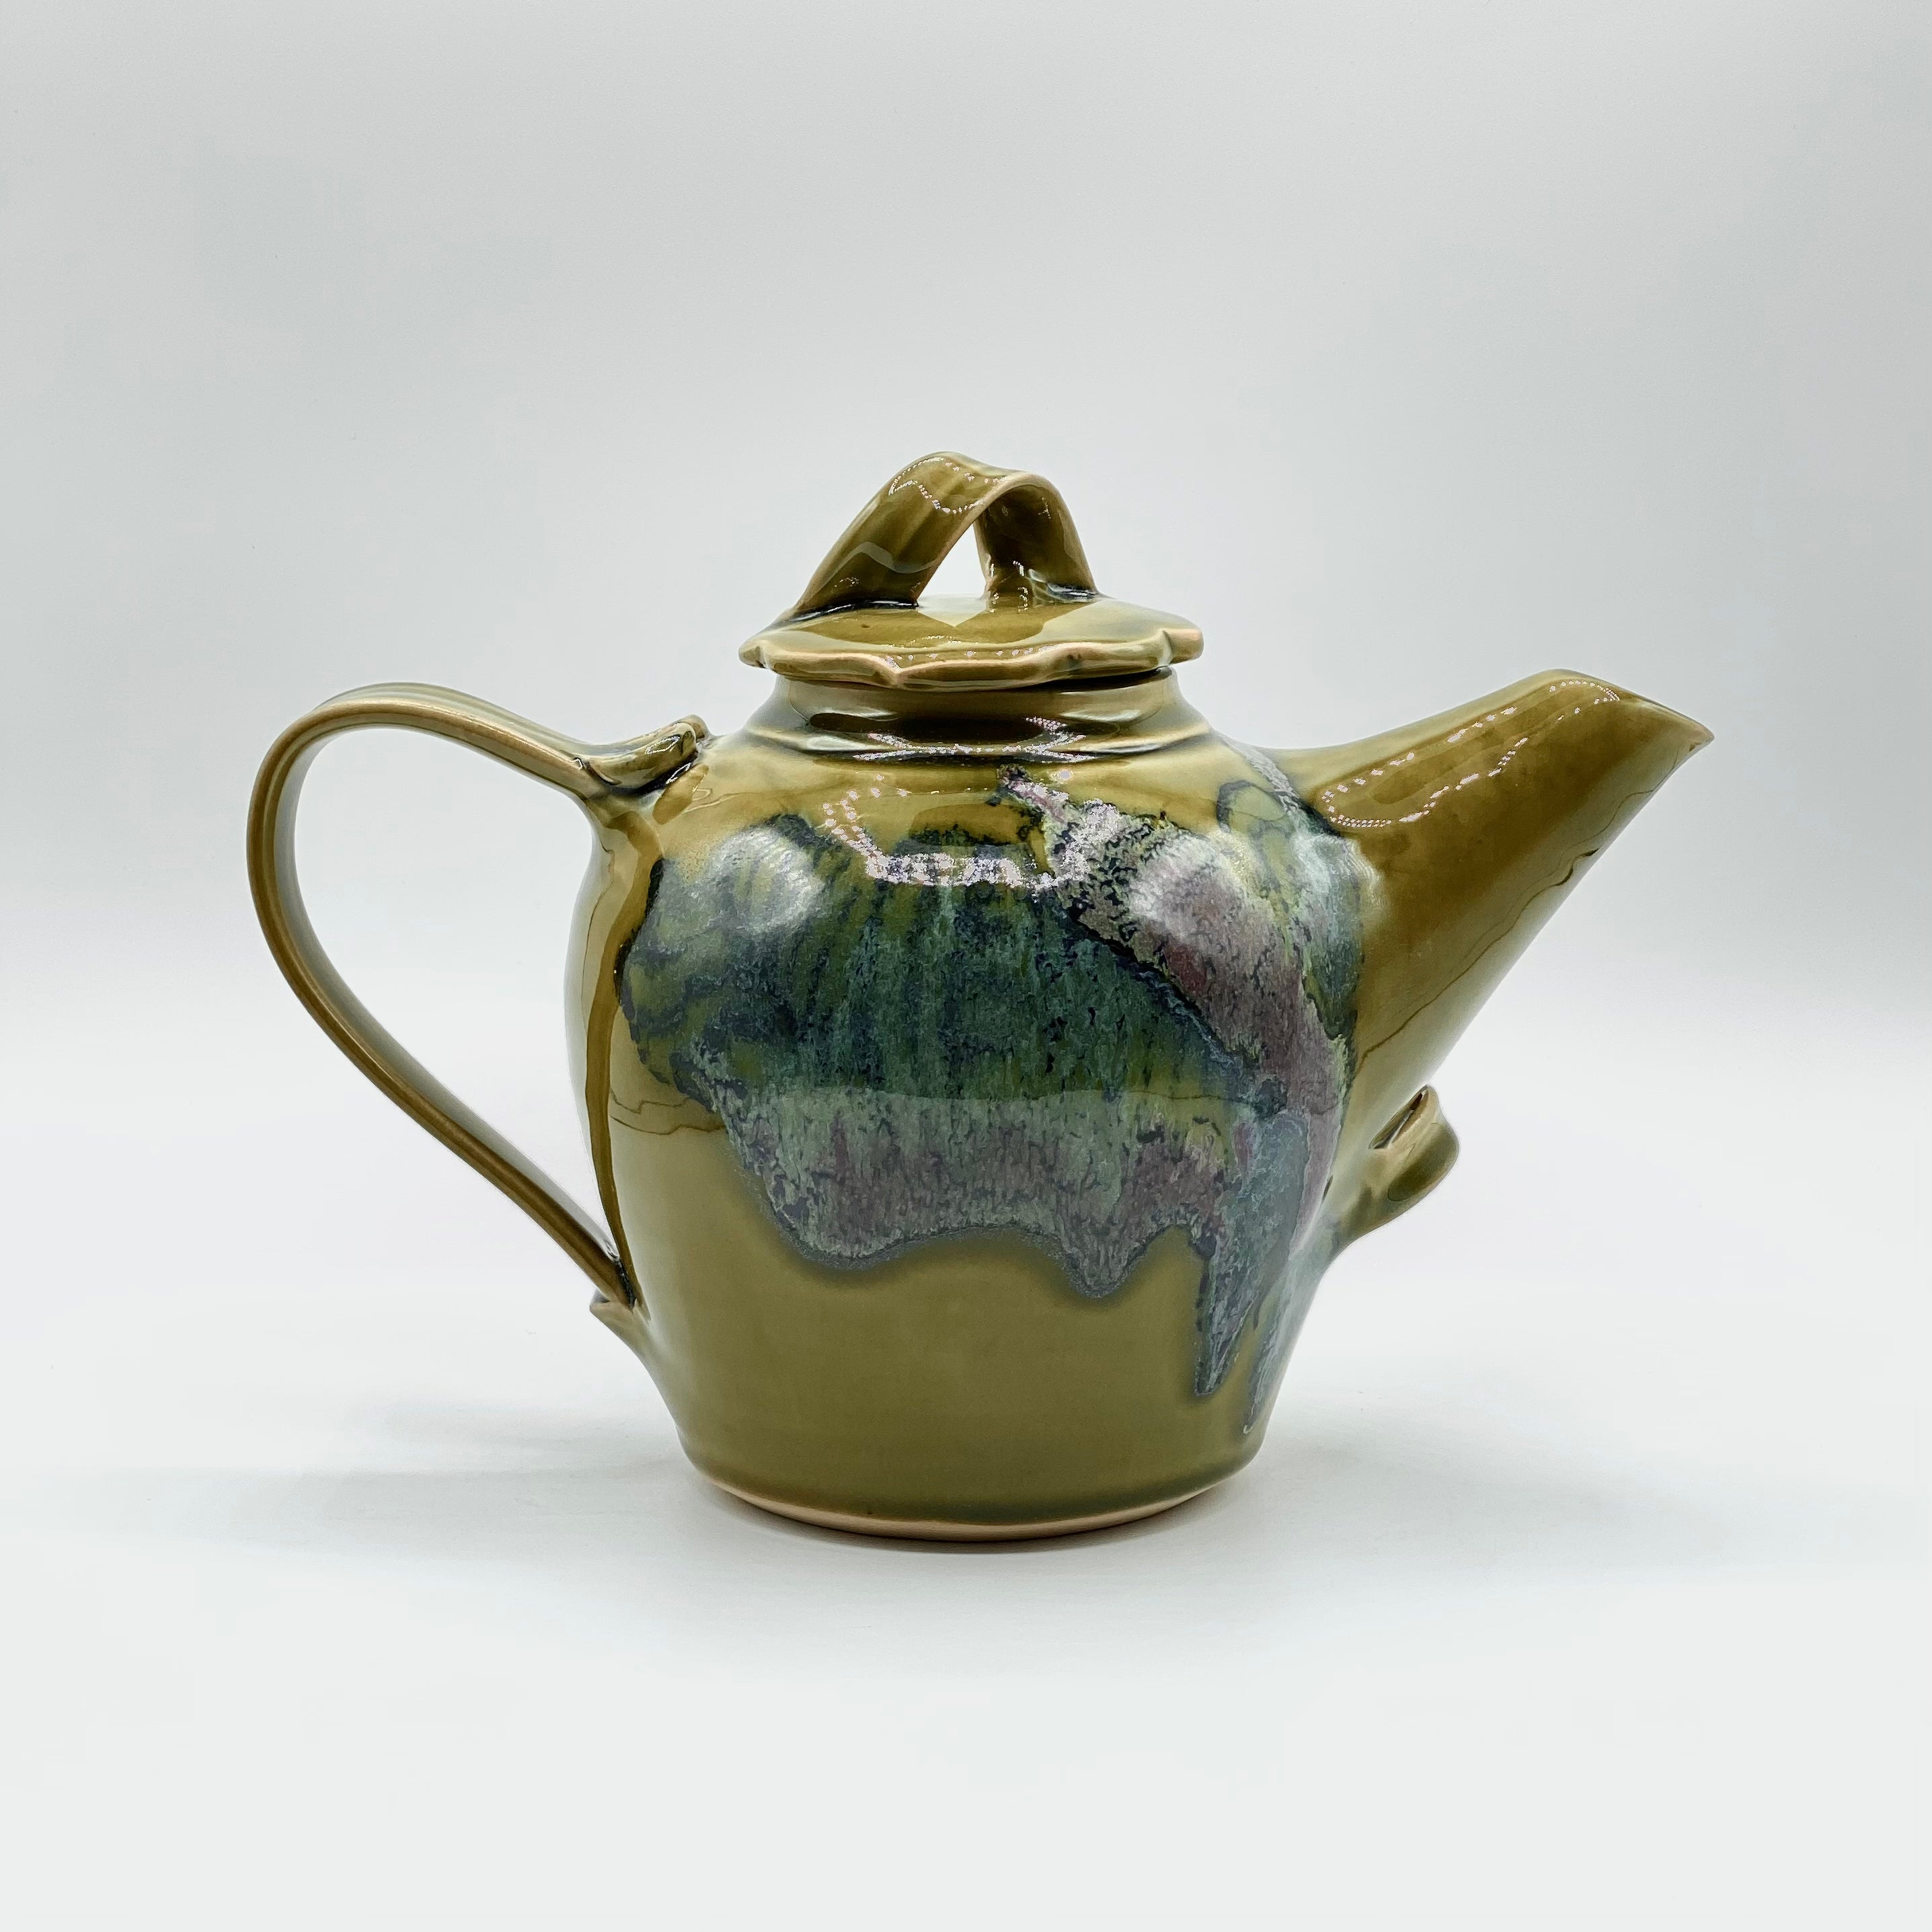 Teapot by Greig Pottery